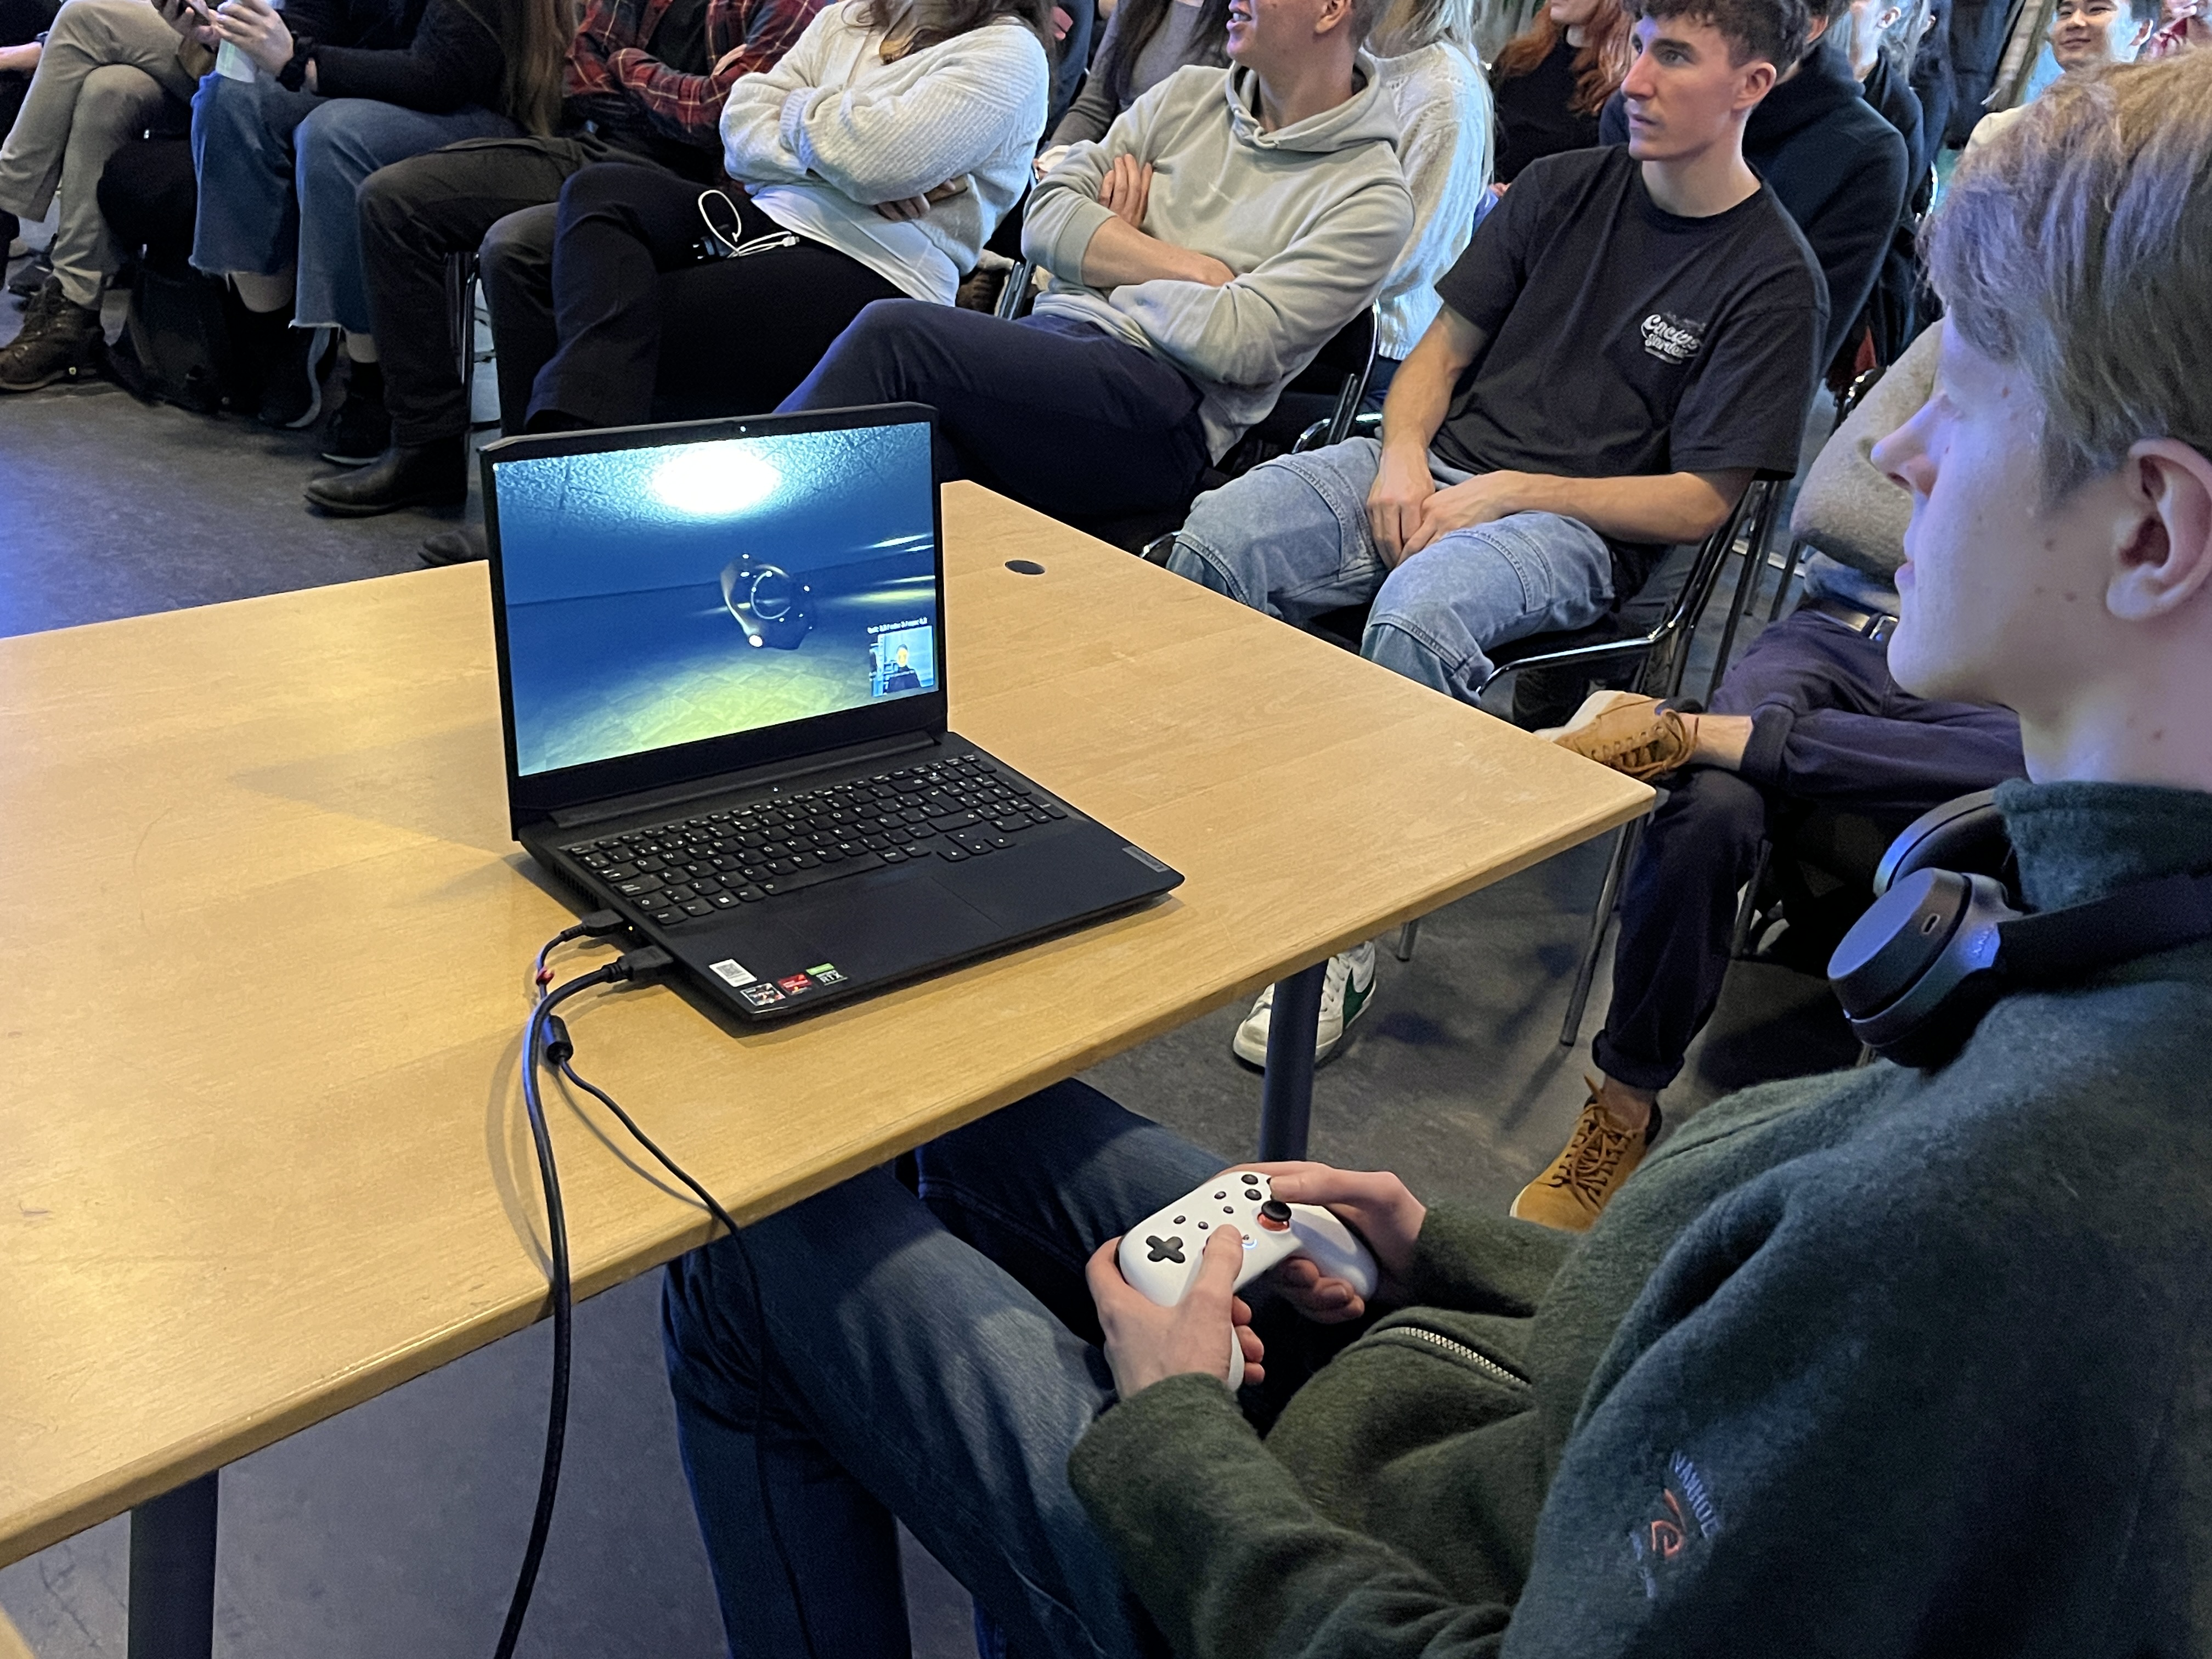 User playing the game with an audience watching on a big screen